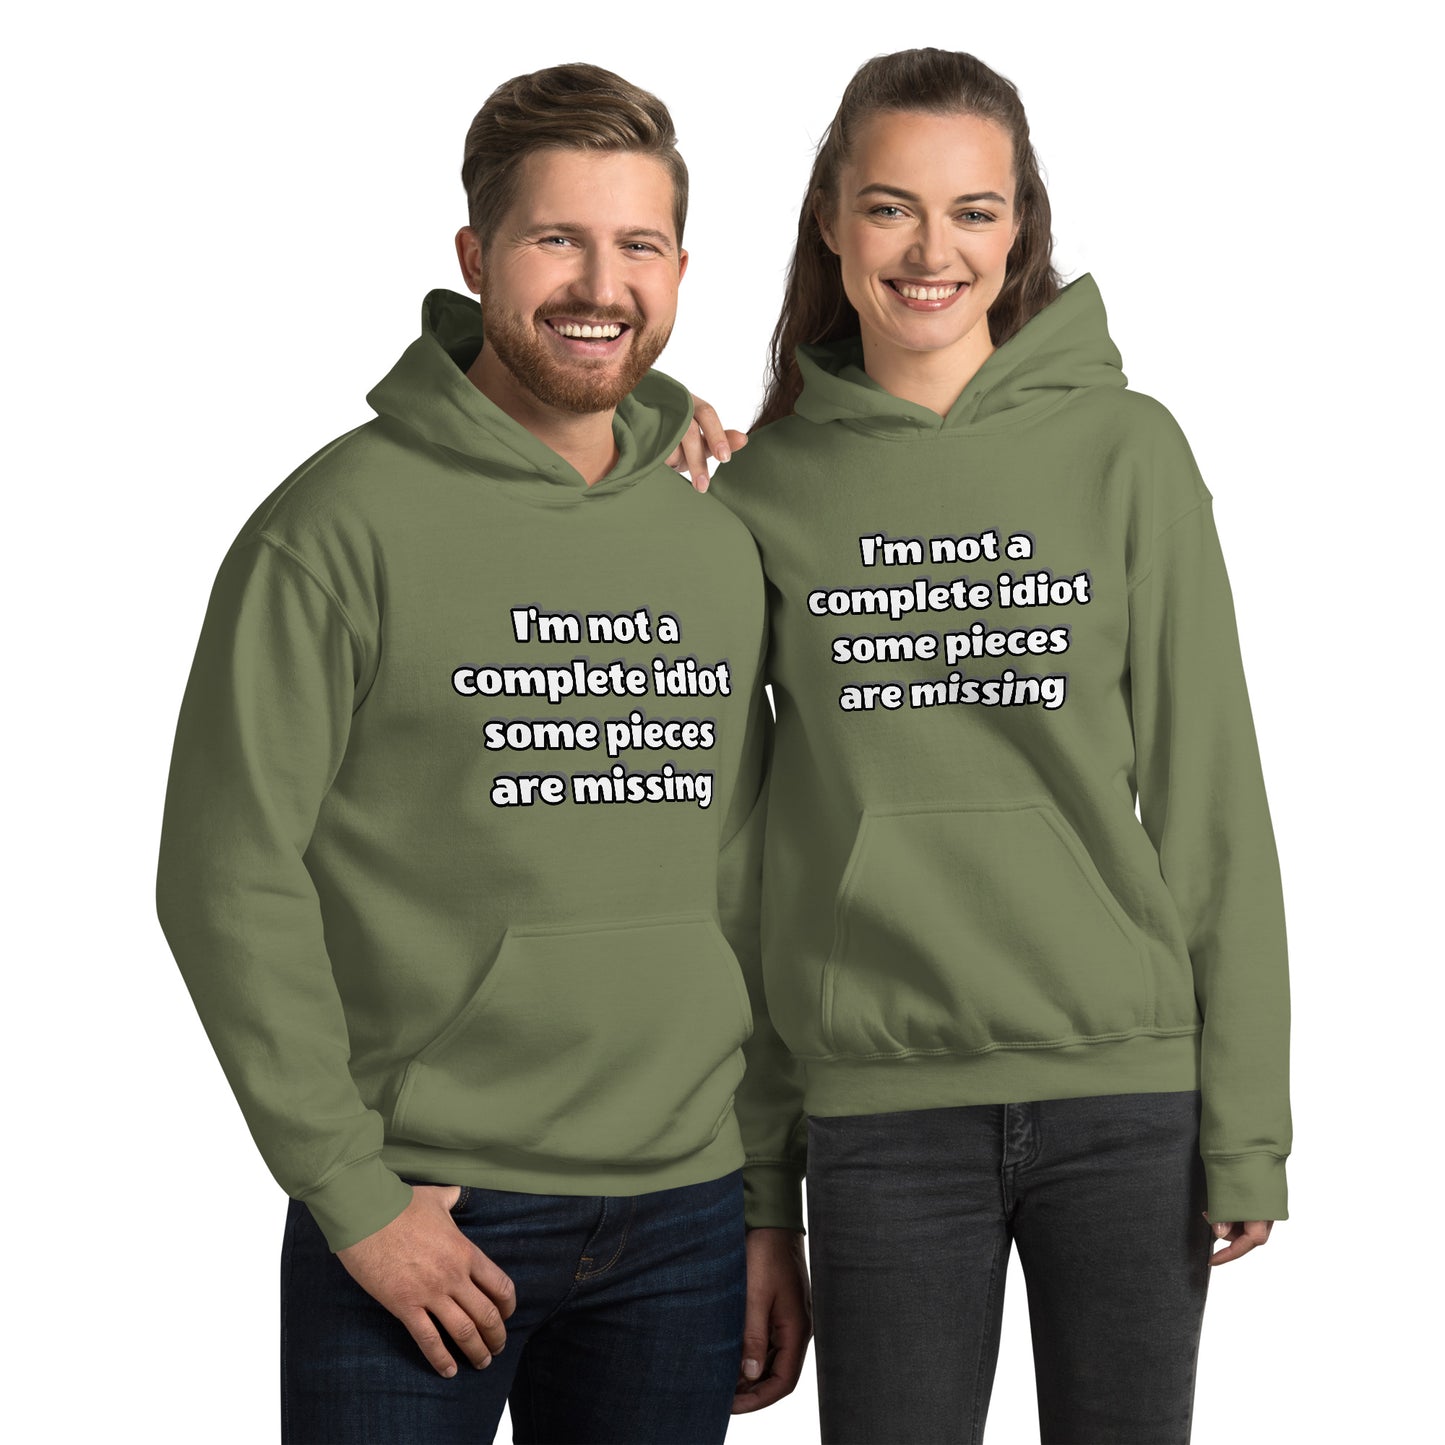 Men and women with military green hoodie with text “I’m not a complete idiot, some pieces are missing”